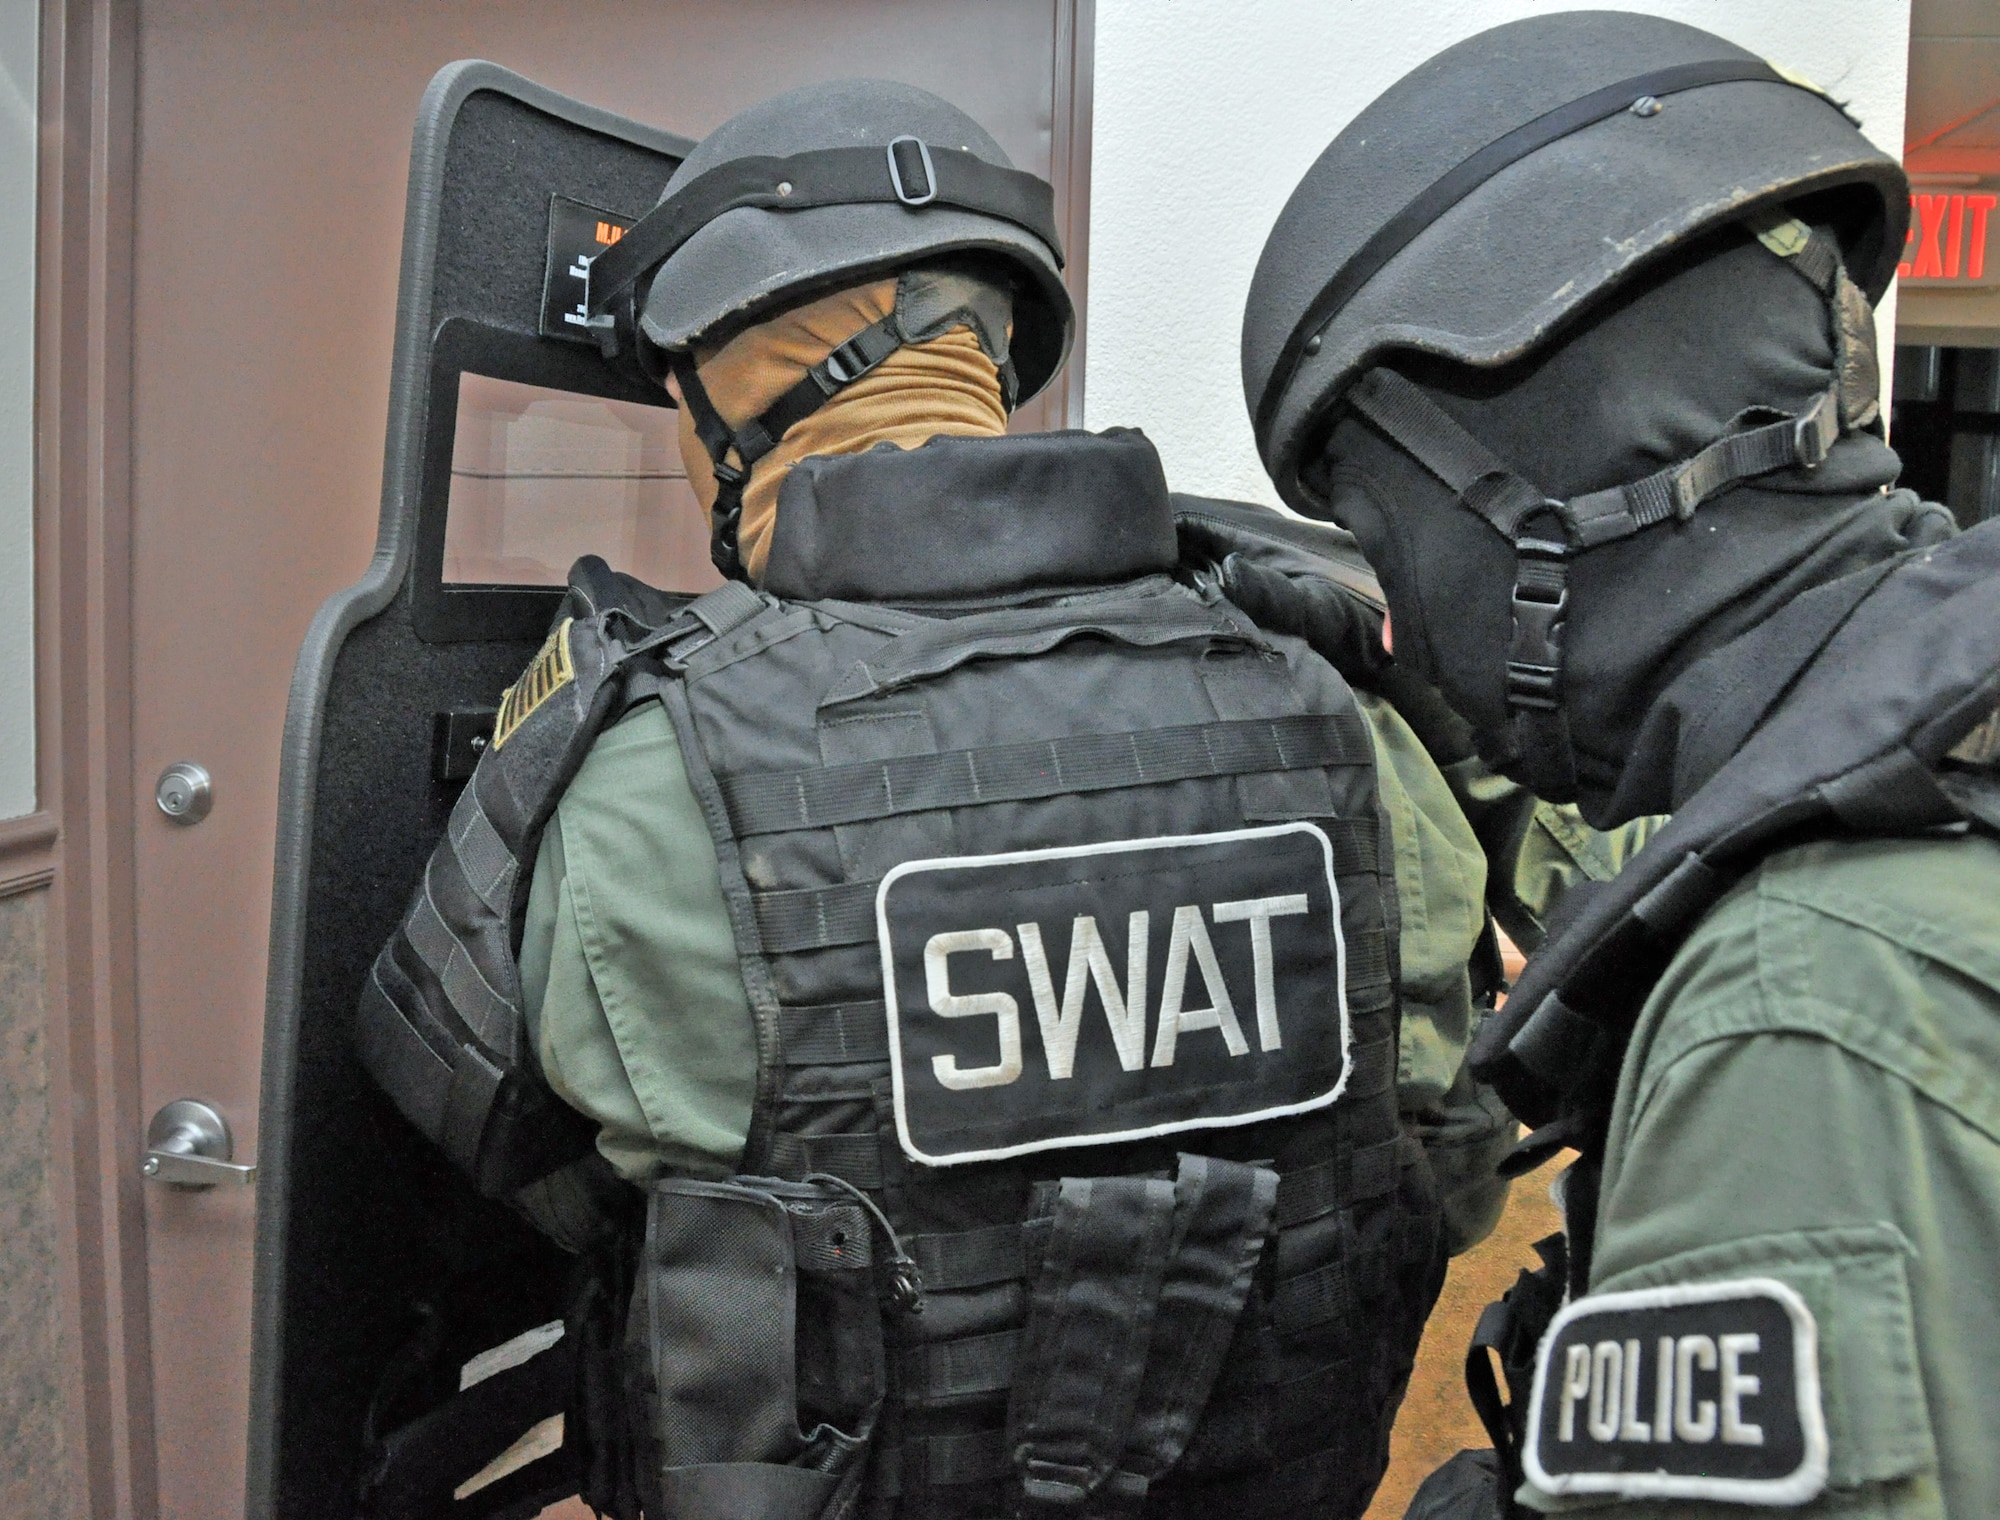 Two Travis SWAT team members demonstrate how thy would form up behind a shield before entering a room Feb. 7 on base. (U.S. Air Force photo/Staff Sgt. Patrick Harrower)